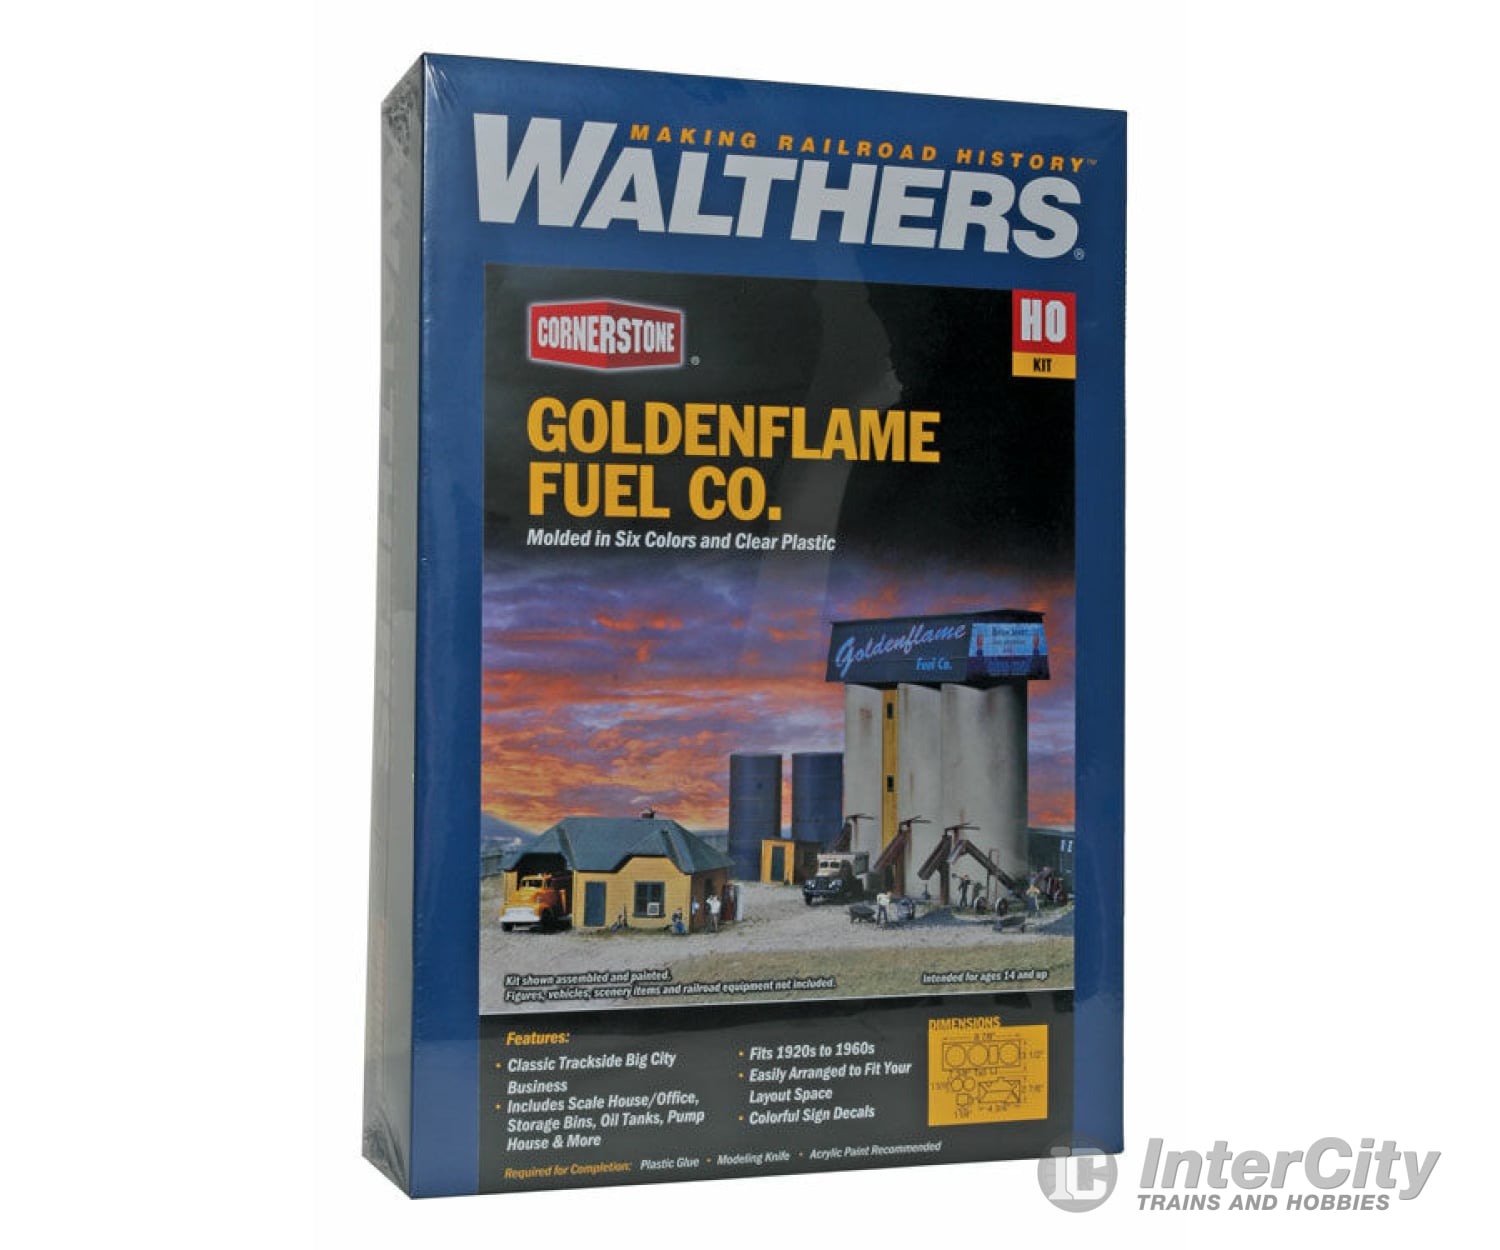 Walthers Cornerstone Ho 3087 Goldenflame Fuel Co. -- Kit Structures